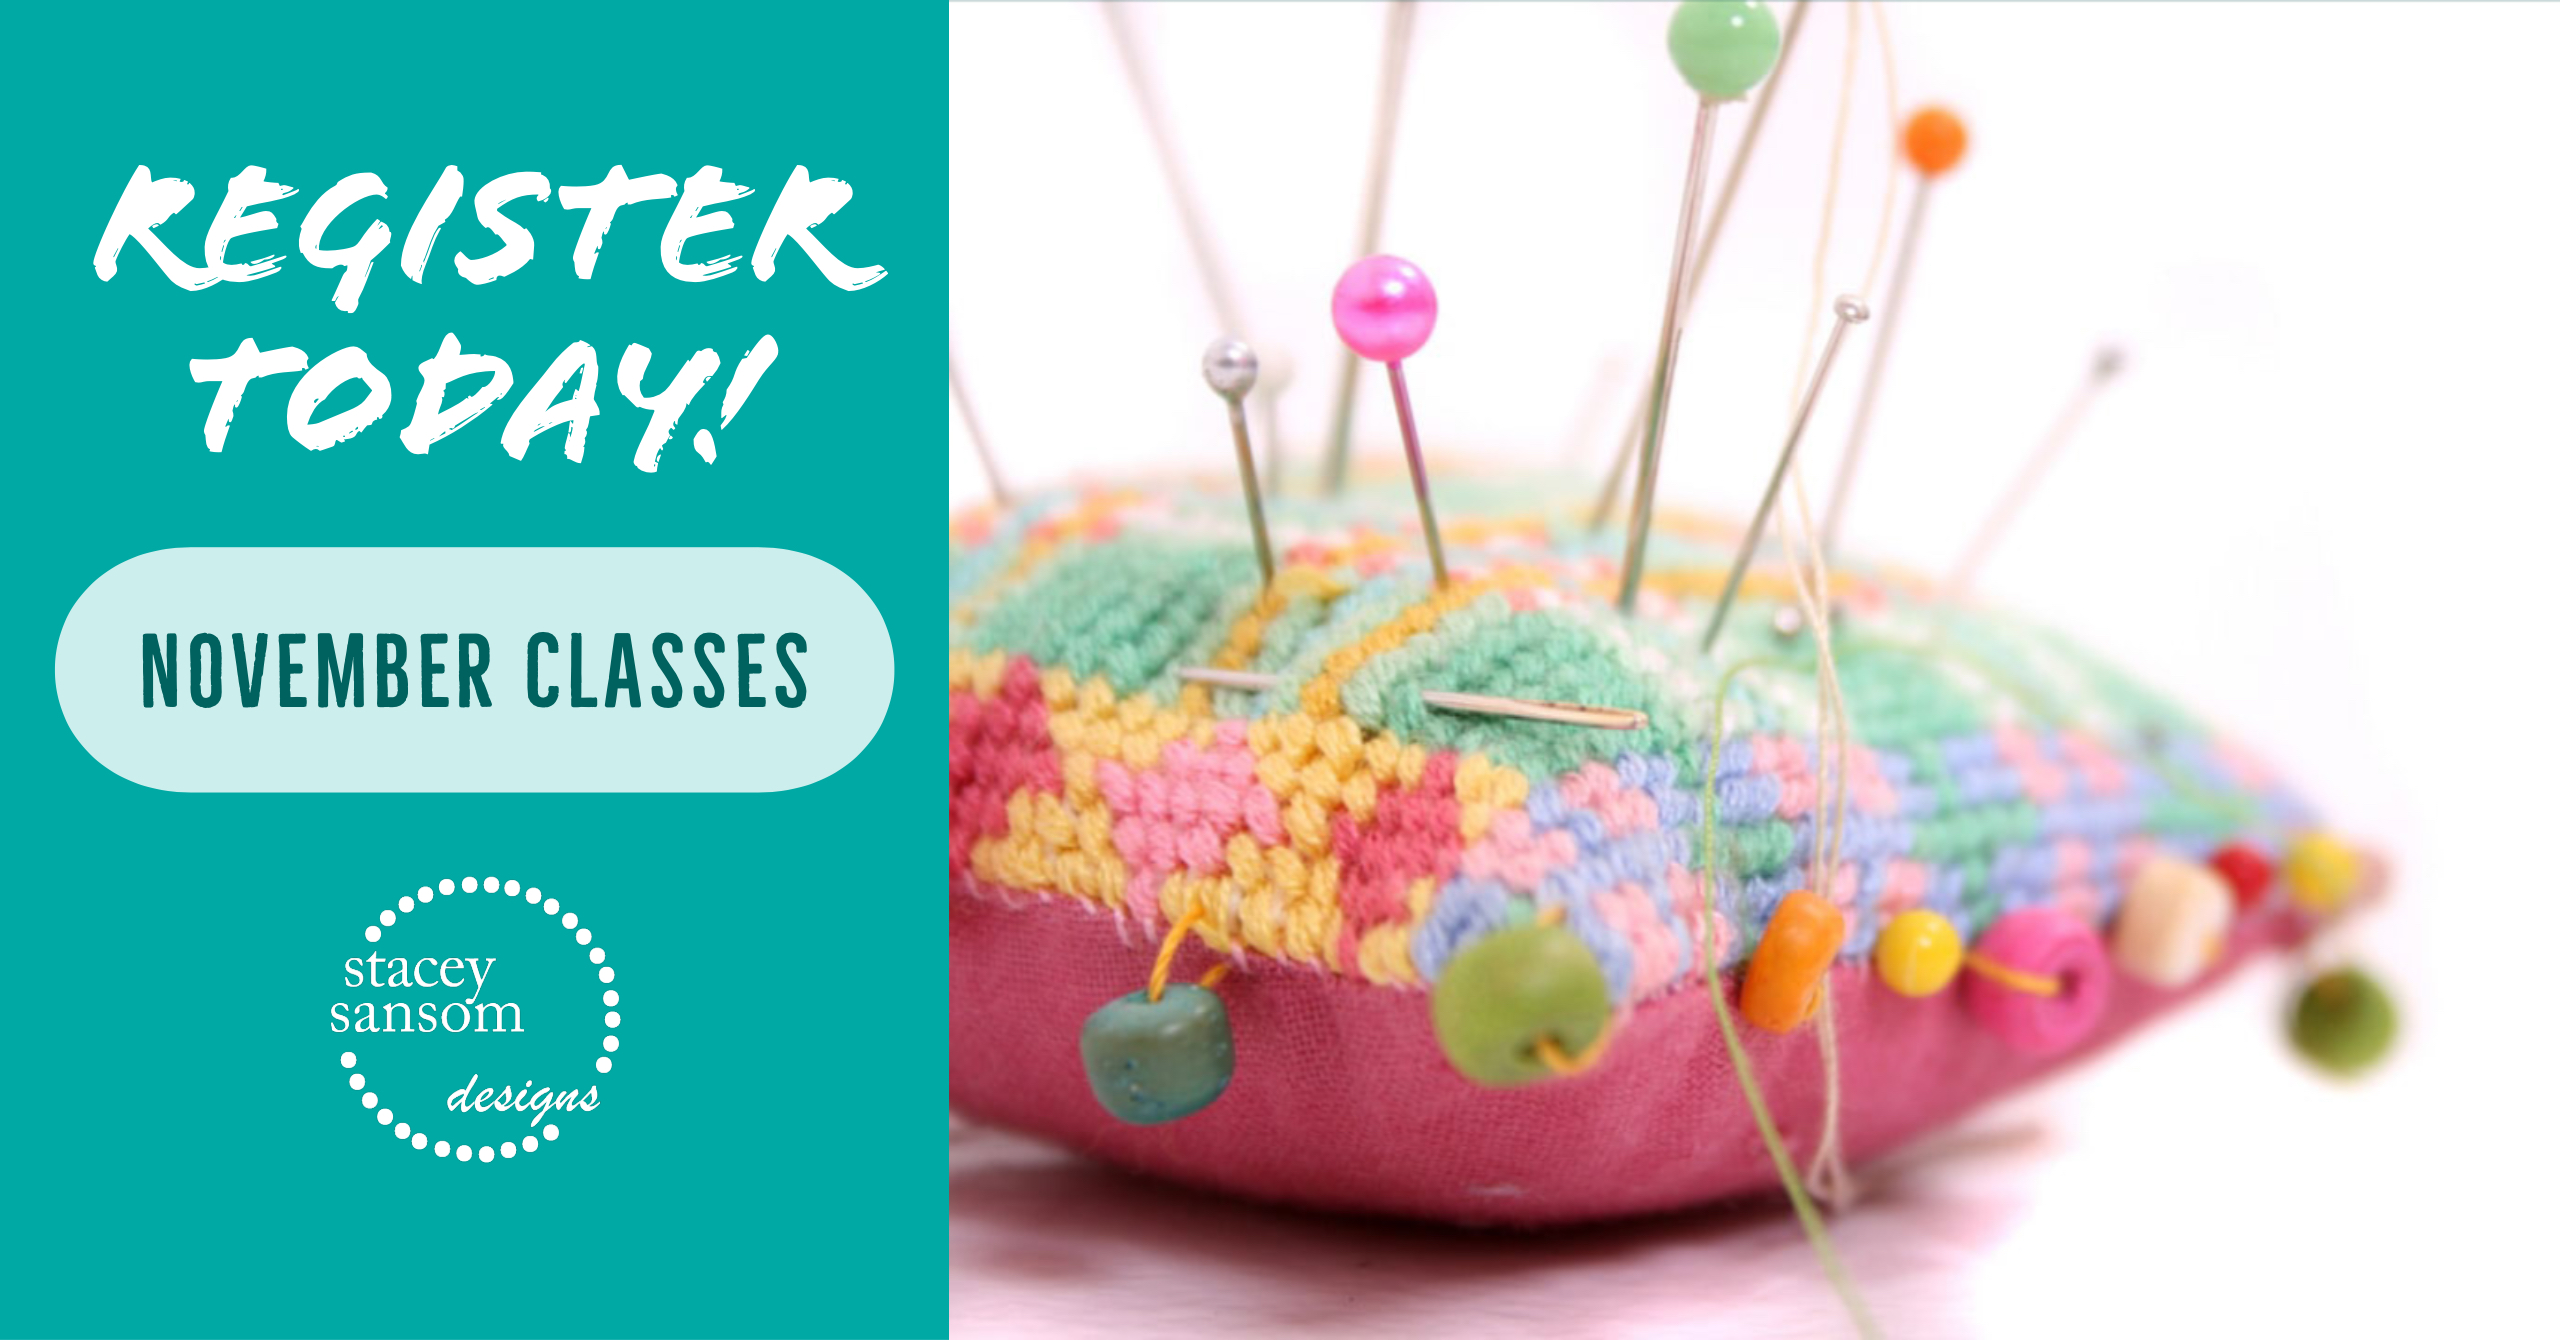 Register today for November sewing classes at Stacey Sansom Designs